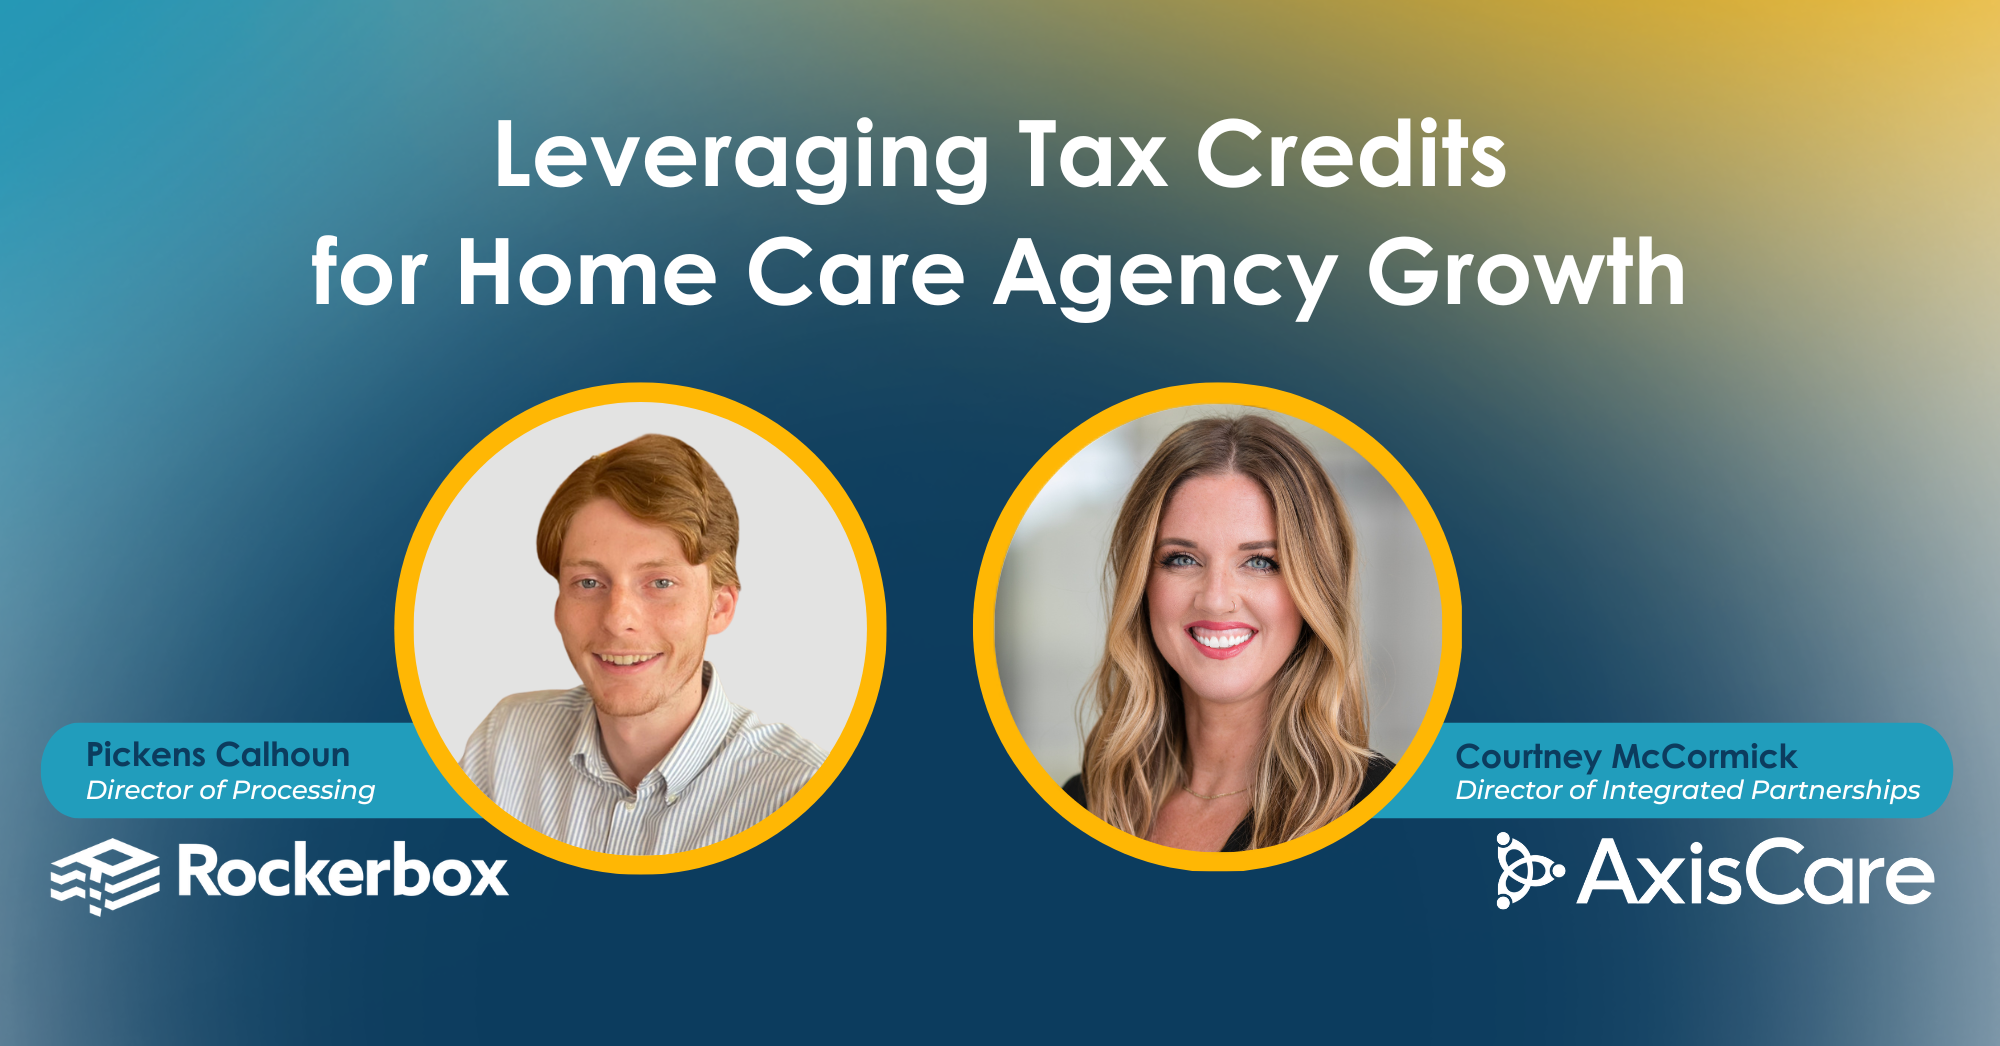 Leveraging Tax Credits for Home Care Agency Growth